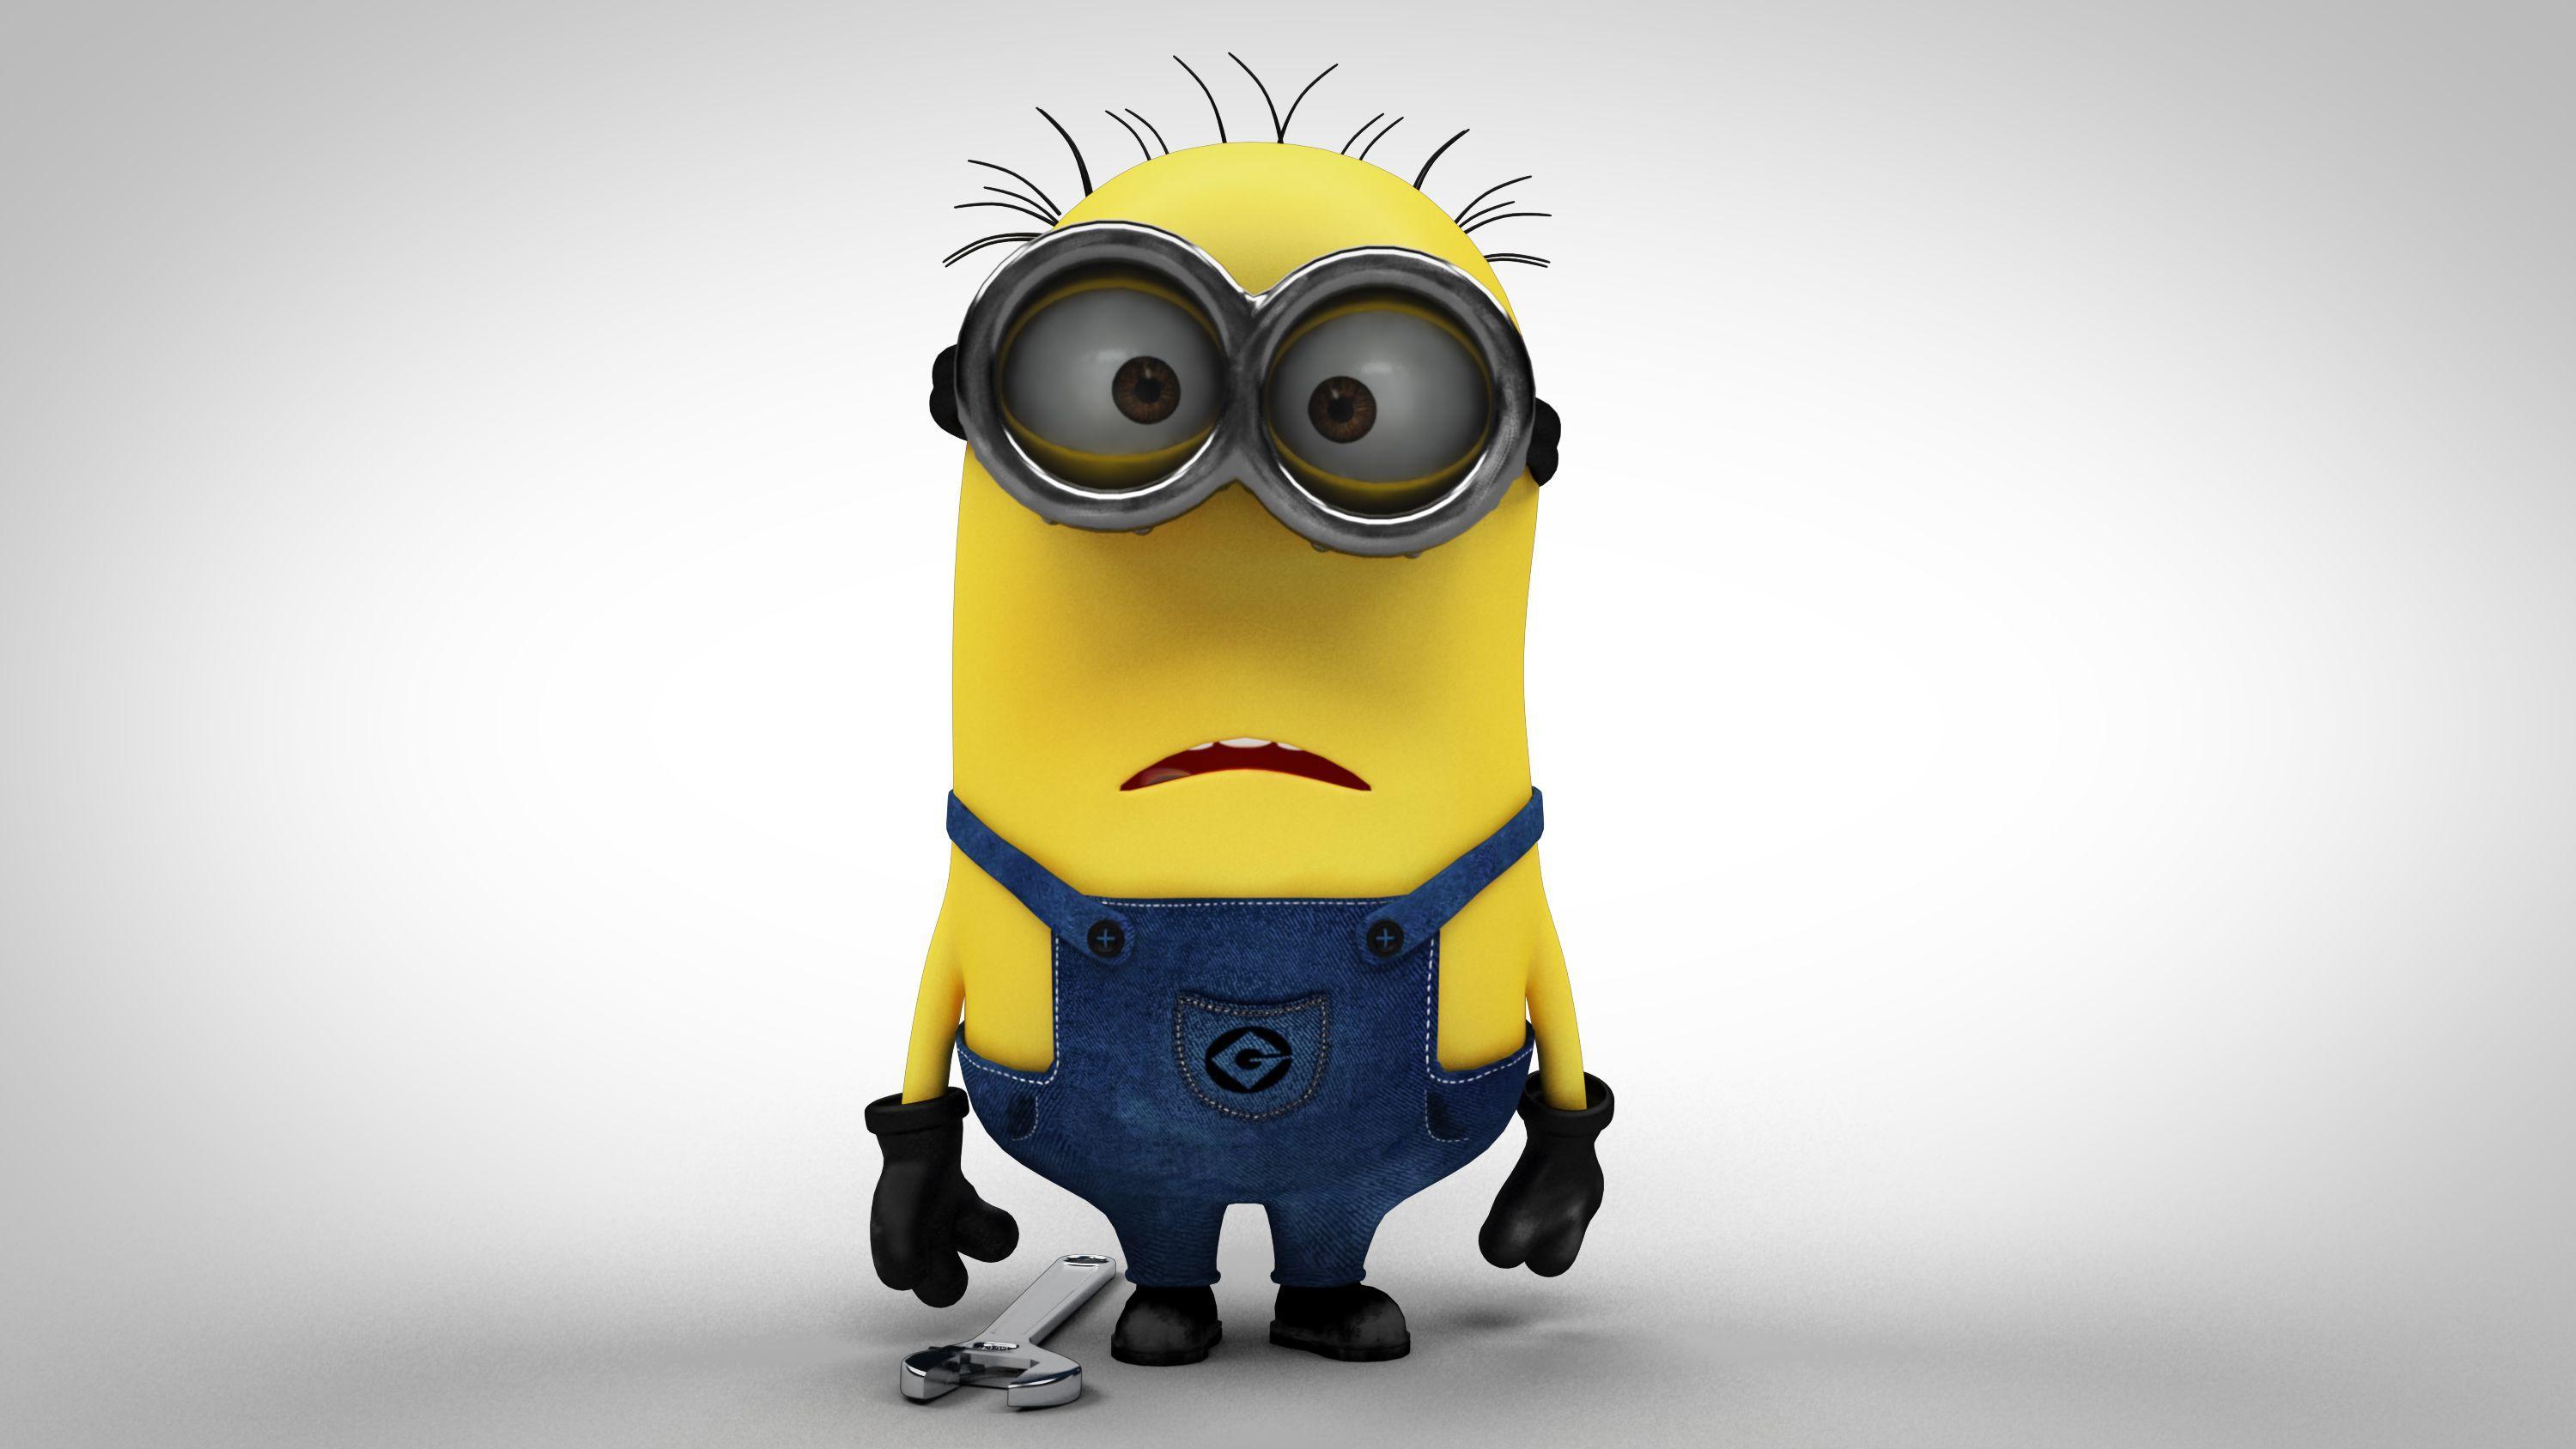 Despicable Me Minion Movie Wallpaper For Free iPhone